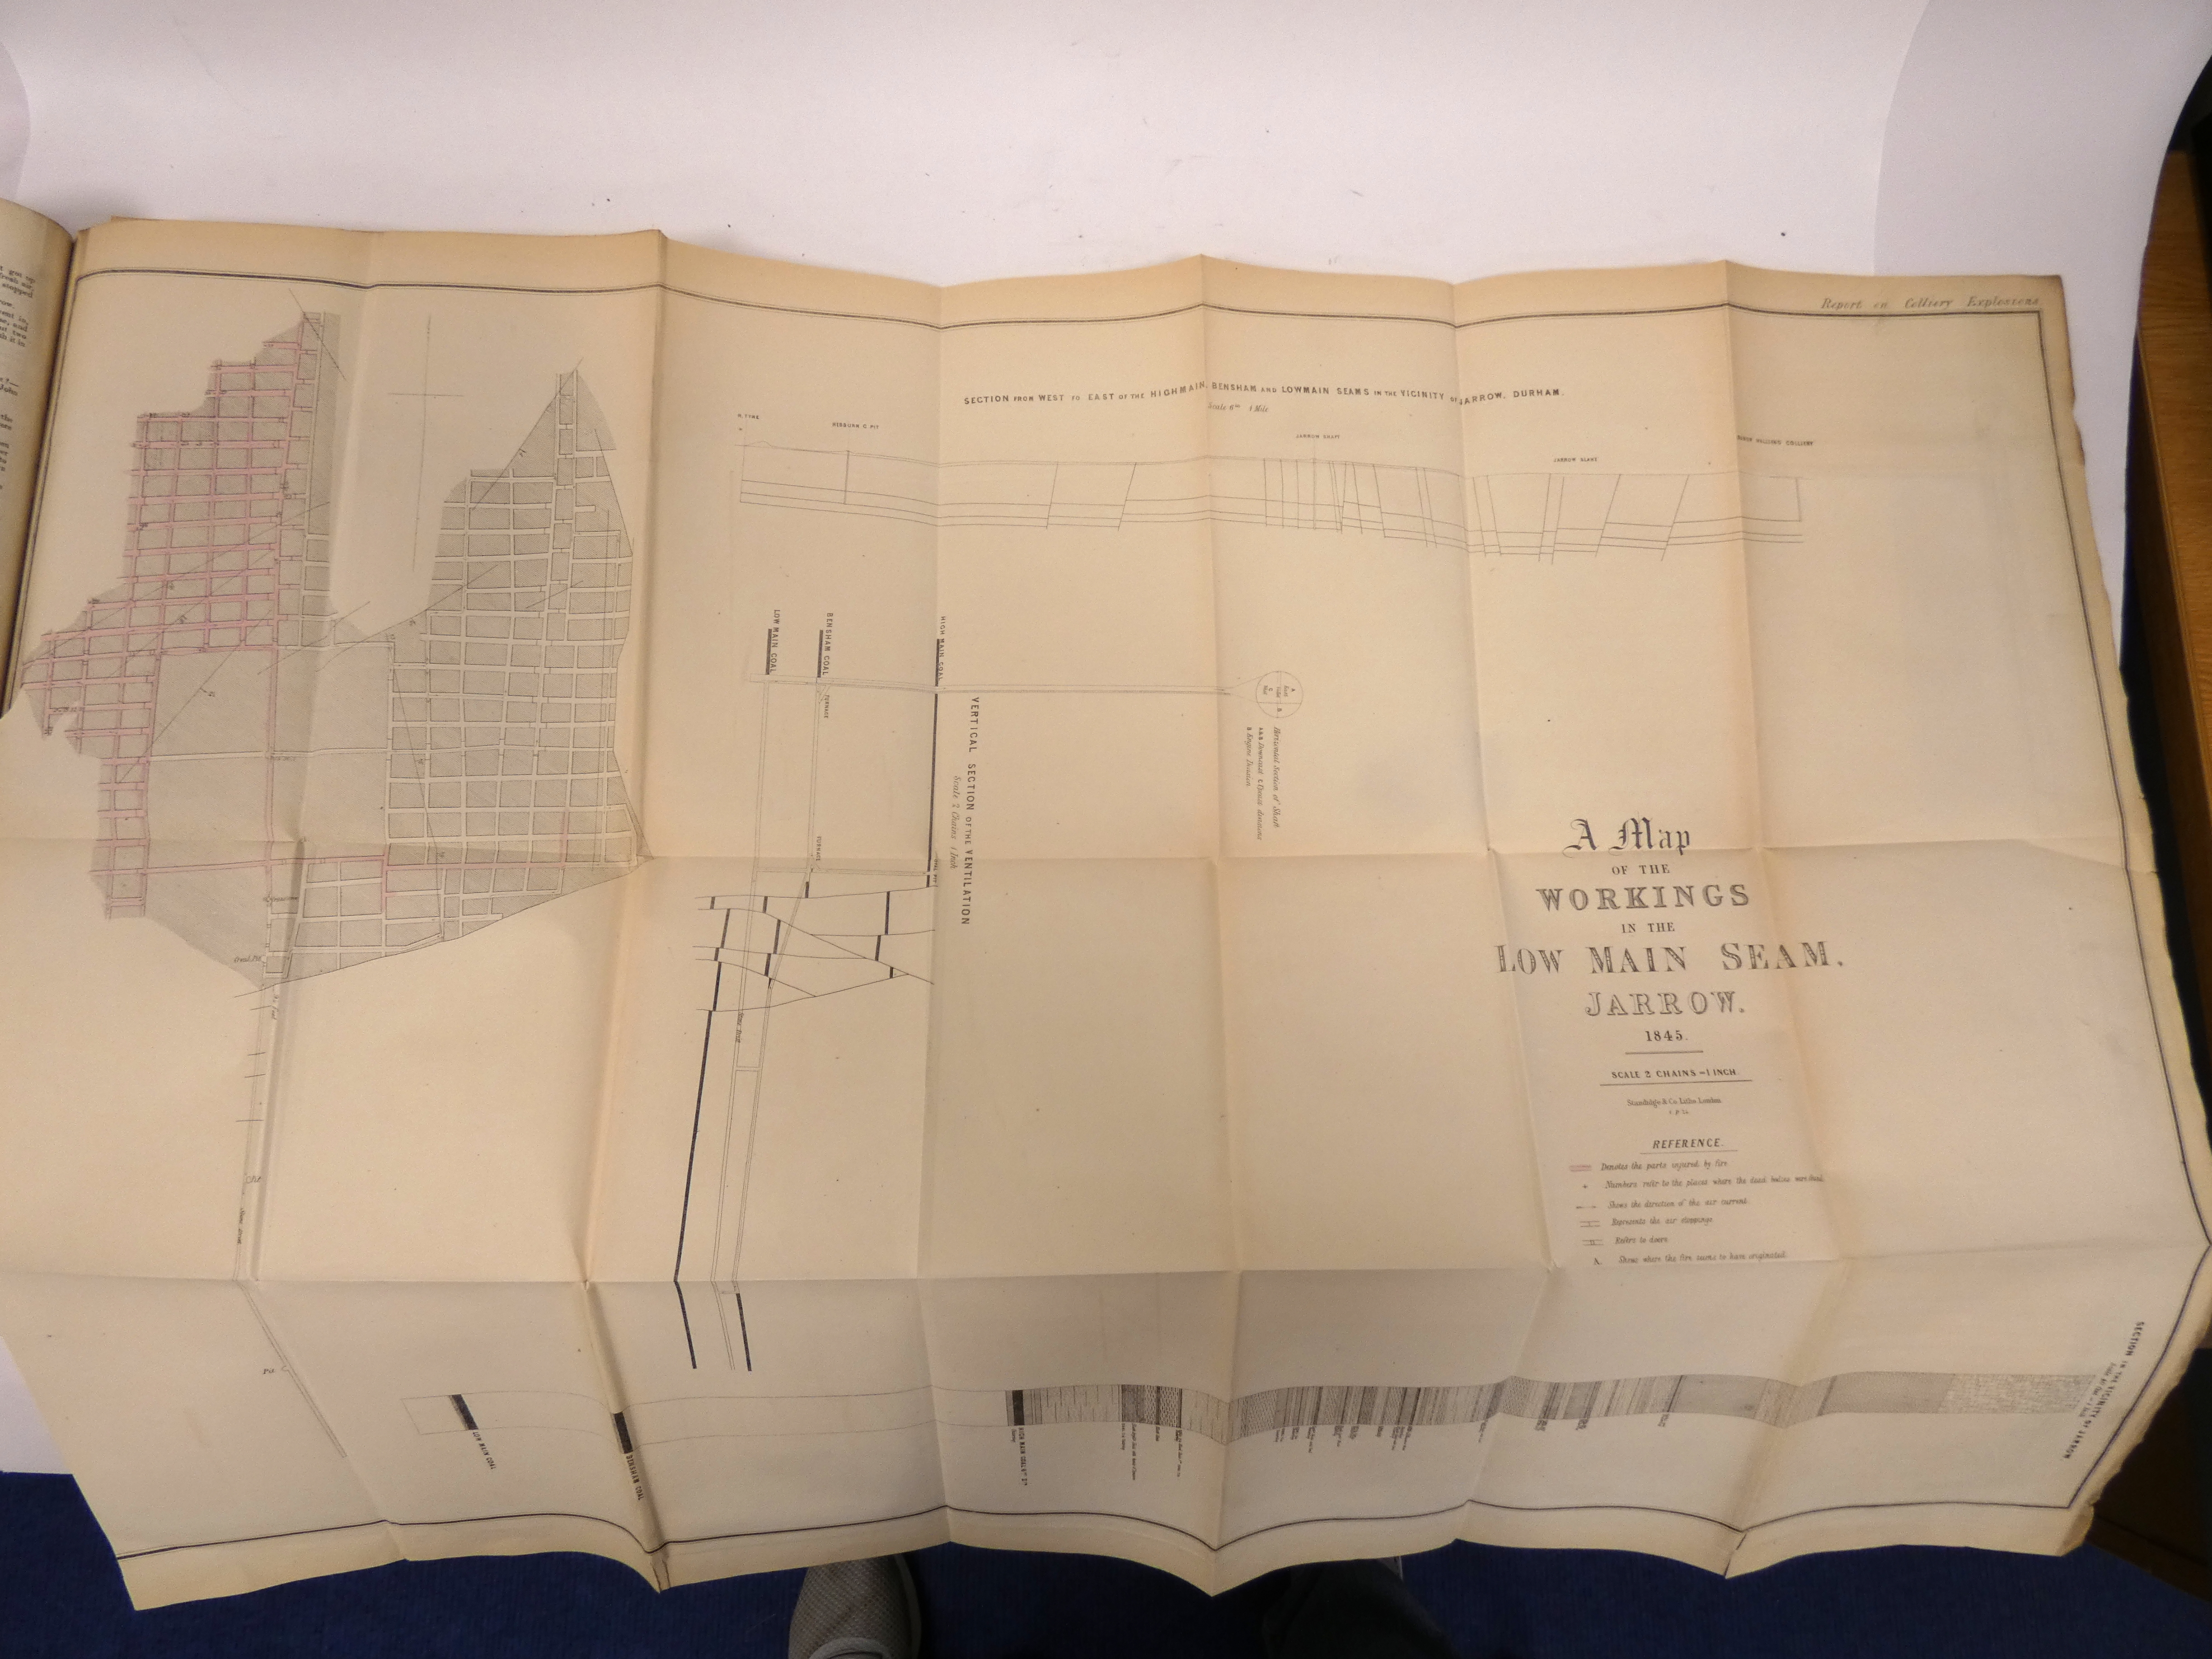 Colliery Reports.  Four Reports on Colliery Explosions & Ventilation, bound together. Good hand col. - Image 3 of 4